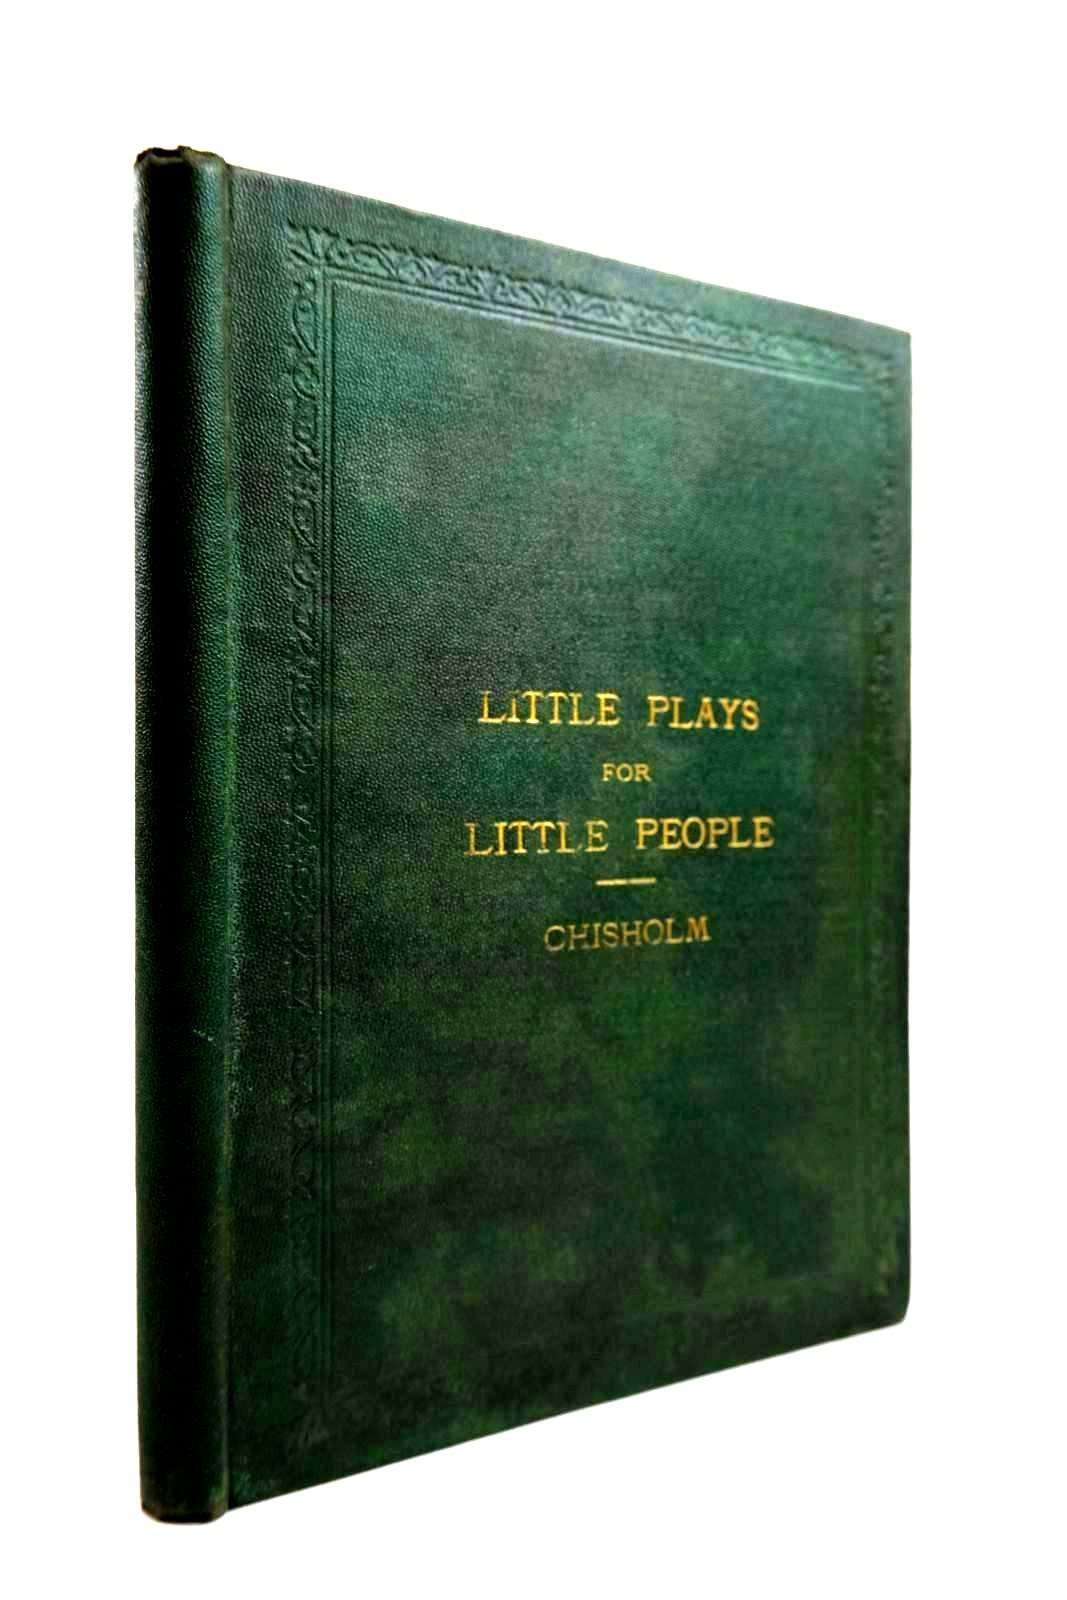 Photo of LITTLE PLAYS FOR LITTLE PEOPLE written by Chisholm, Mrs. published by Bell and Daldy (STOCK CODE: 2134263)  for sale by Stella & Rose's Books